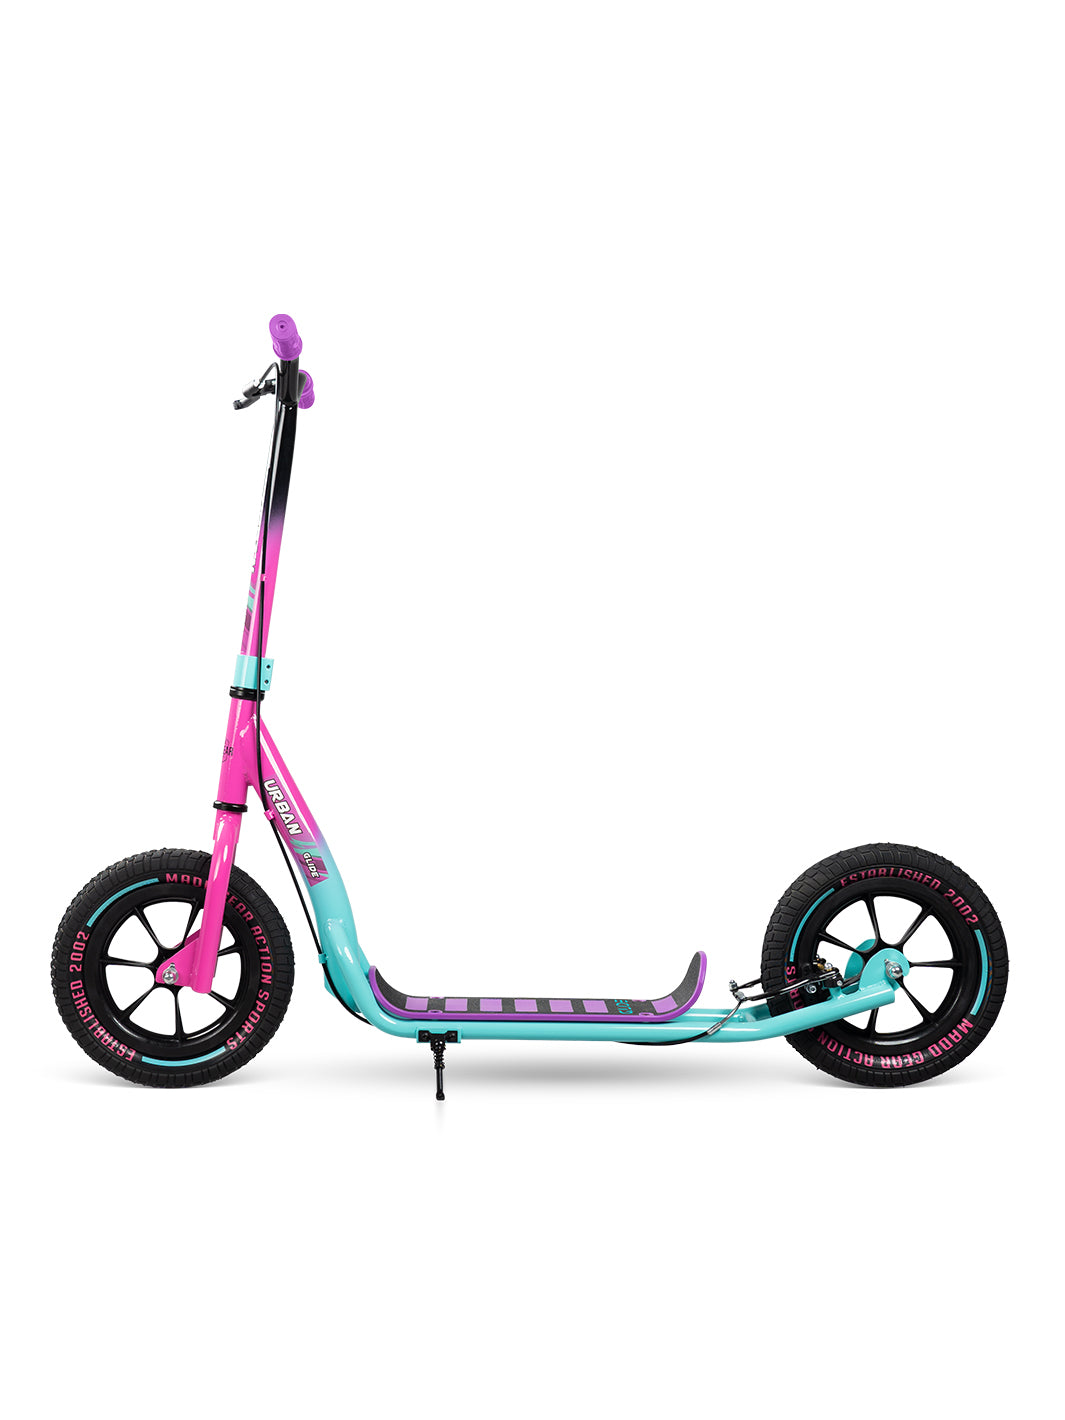 Womens Commuter Scooter Pink Teal Fast Smooth Light Madd Gear Urban